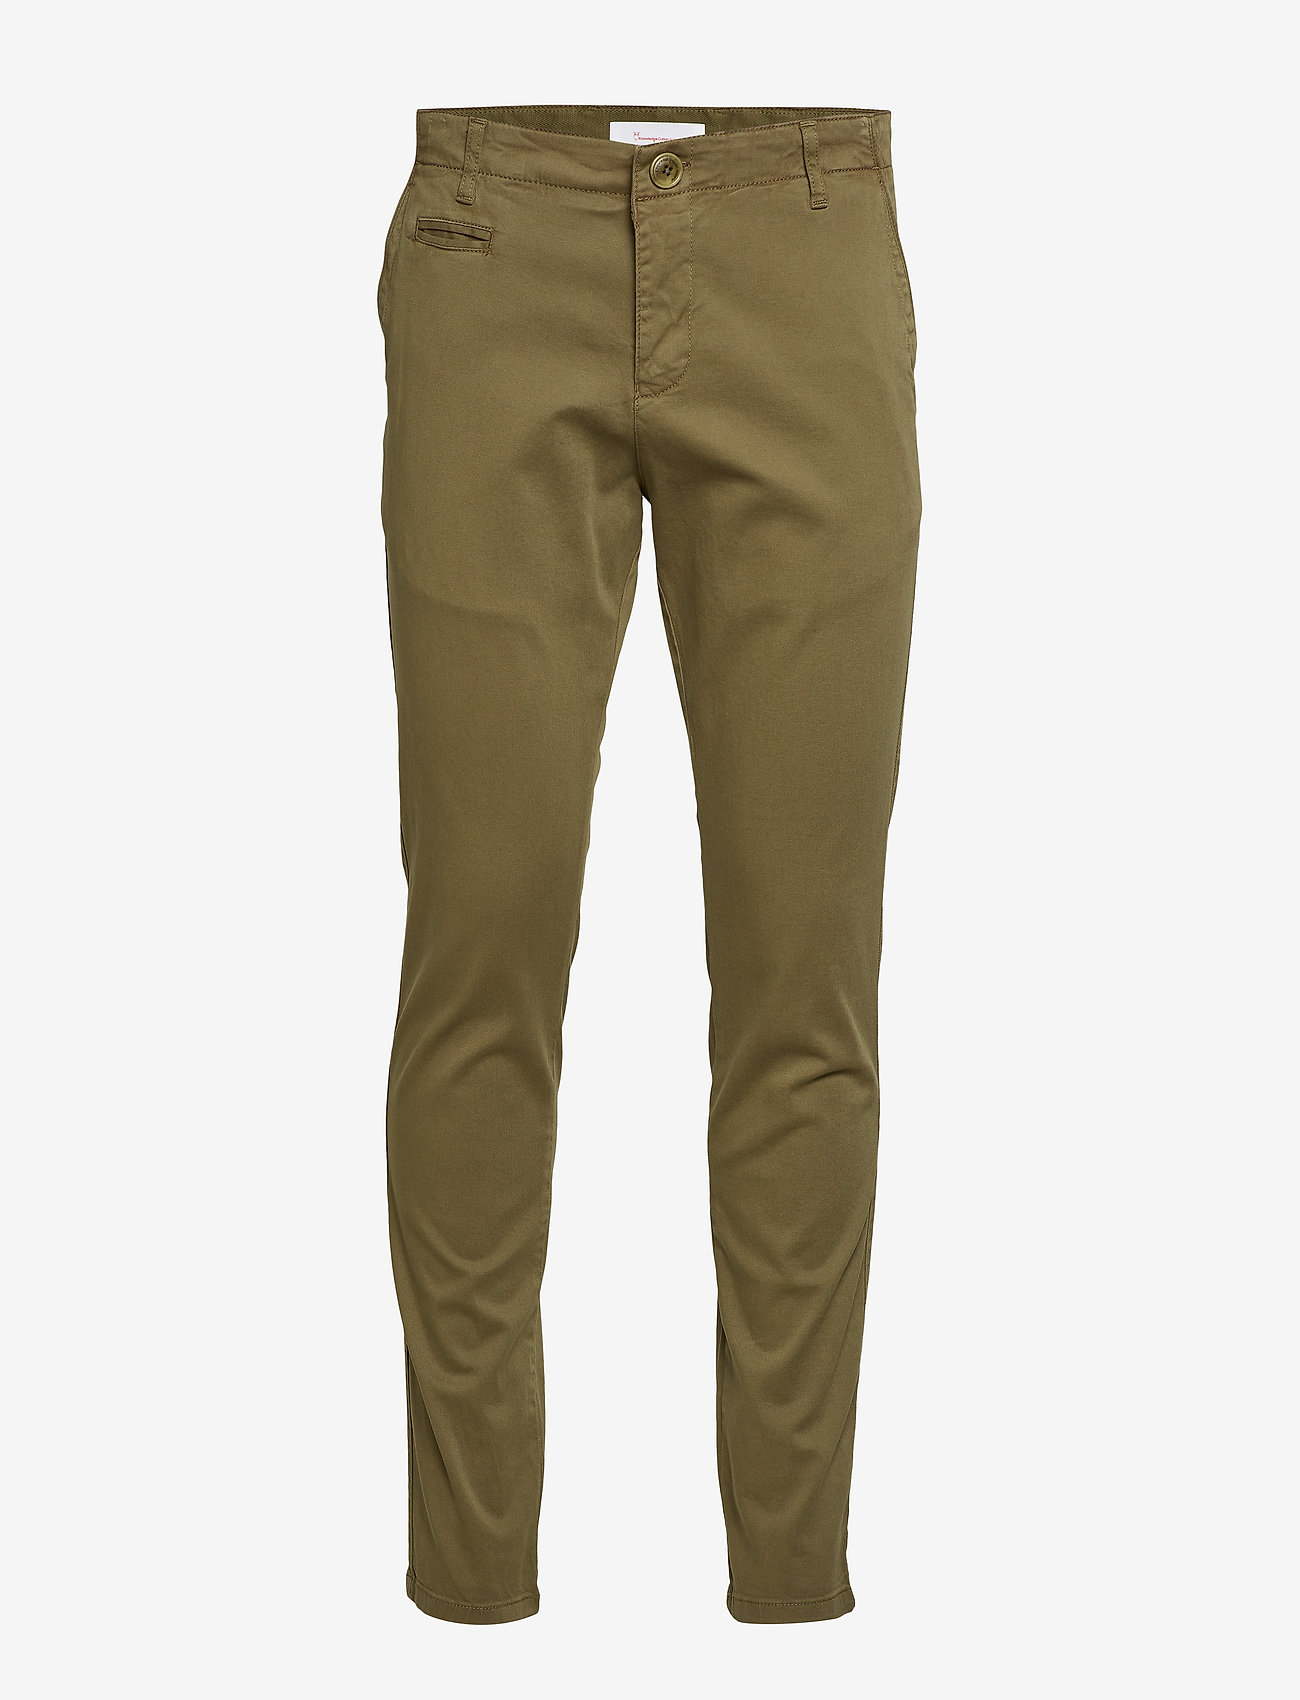 Knowledge Cotton Apparel - JOE slim stretched chino pant - GOT - chino's - burned olive - 0